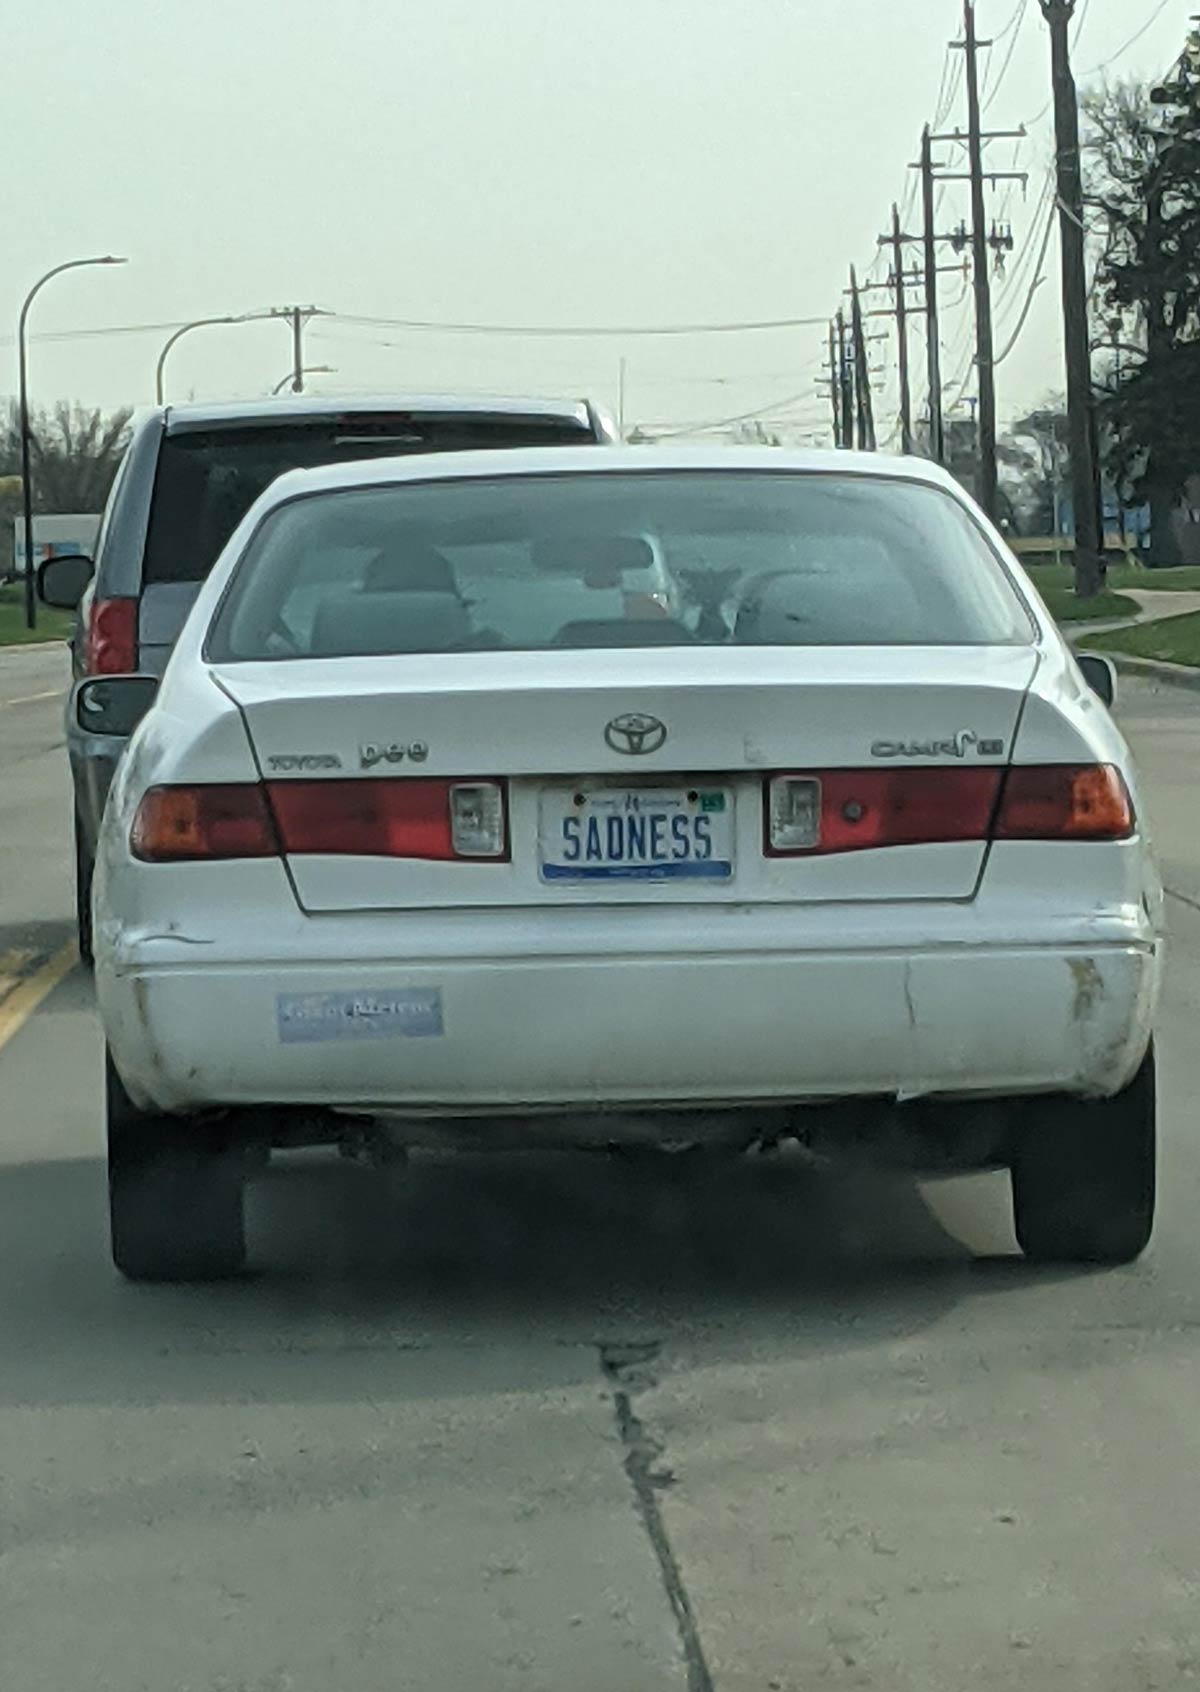 The car in front of me on my way to work, is letting me know what to expect